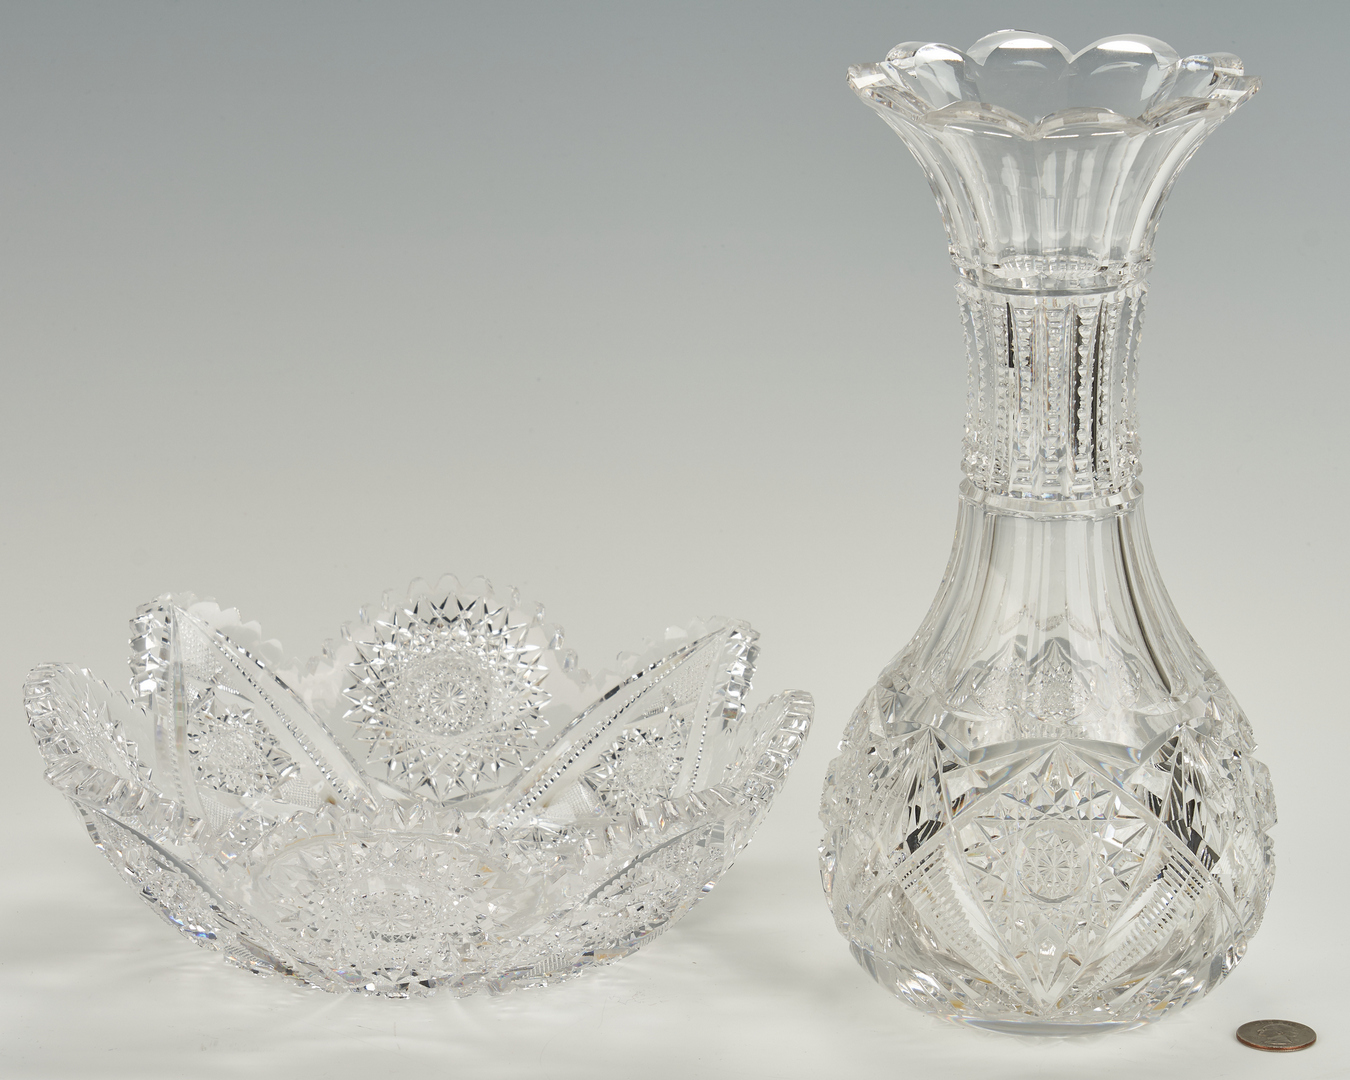 Lot 1077: 11 Decorative Glass Items incl. ABPCG